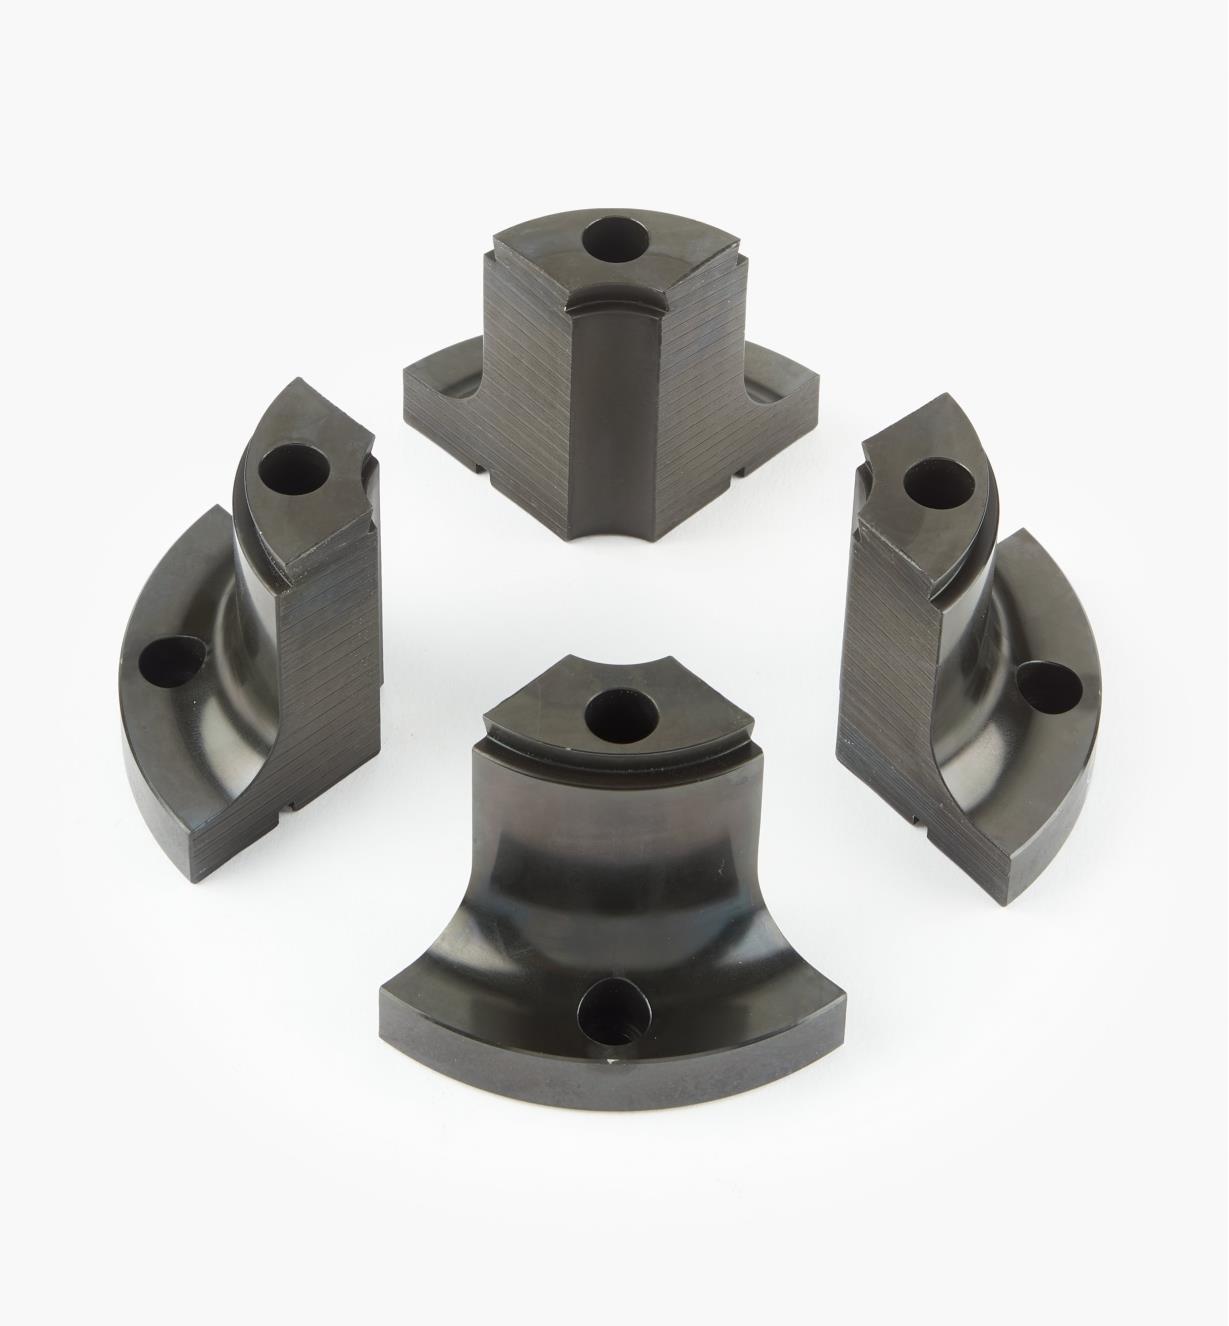 58B4065 - Axminster Cylinder Jaws, 27mm (1 1/16")